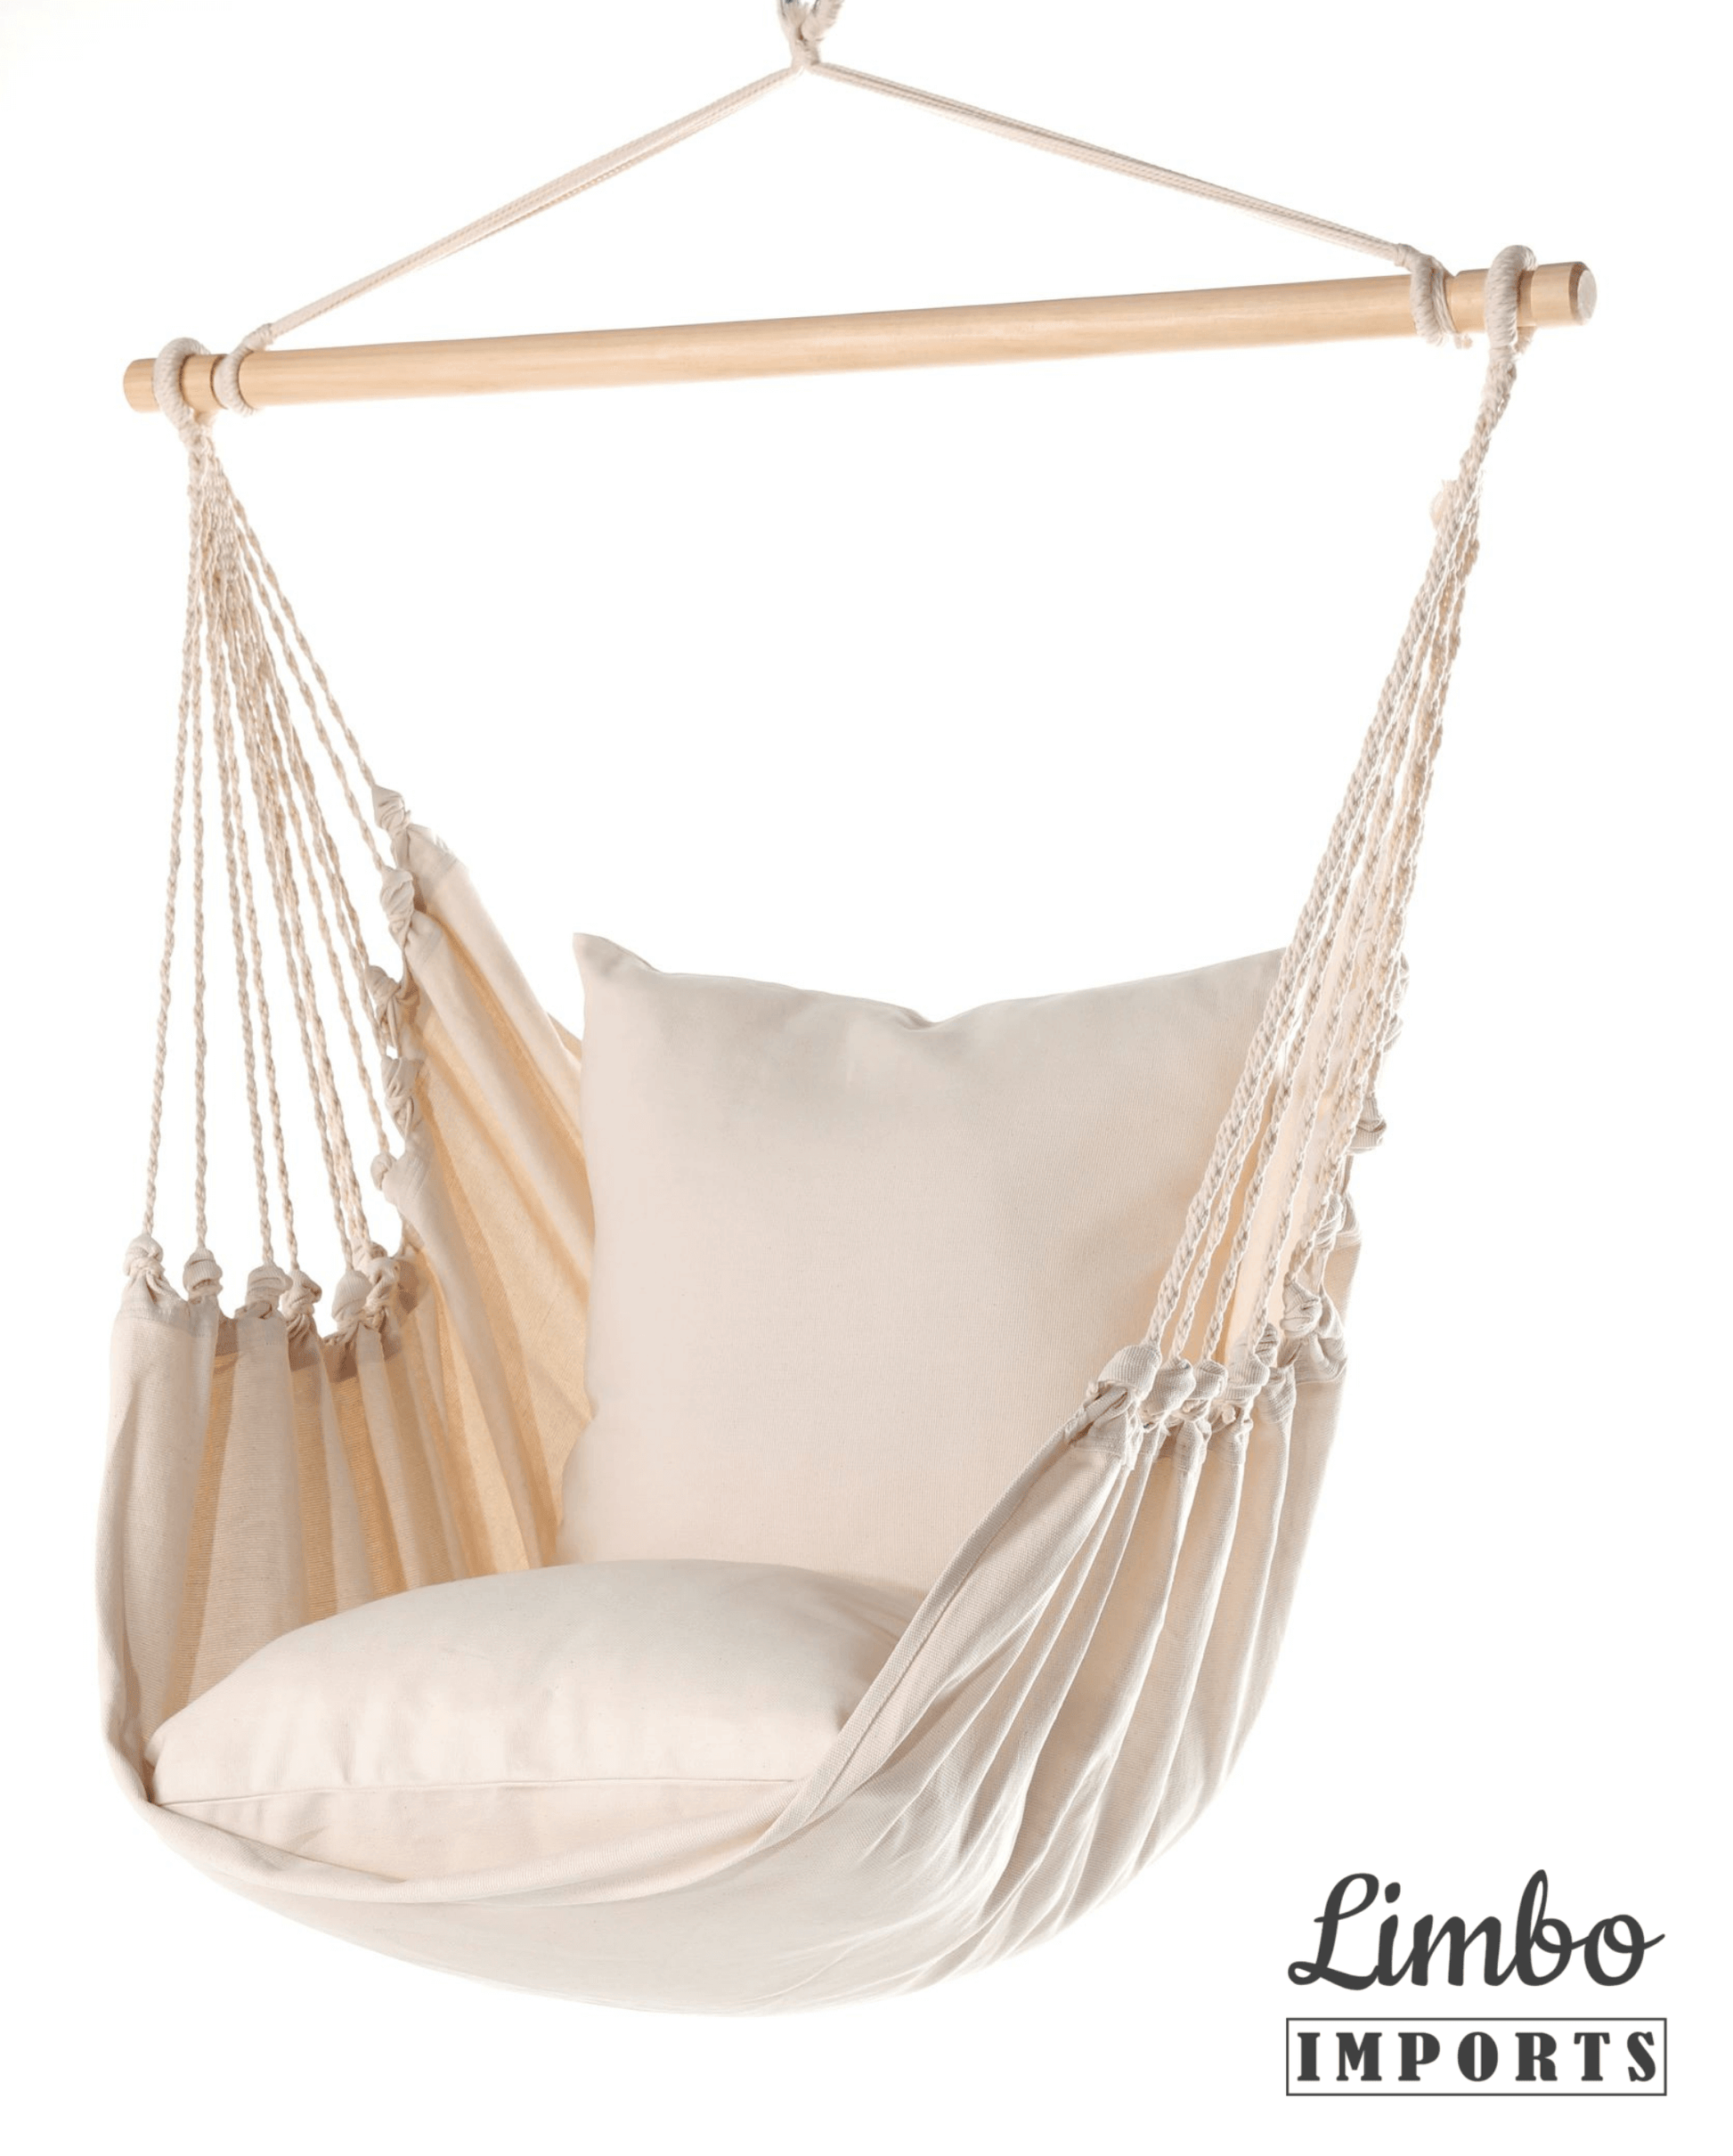 Hanging hammock chair swing with pillows